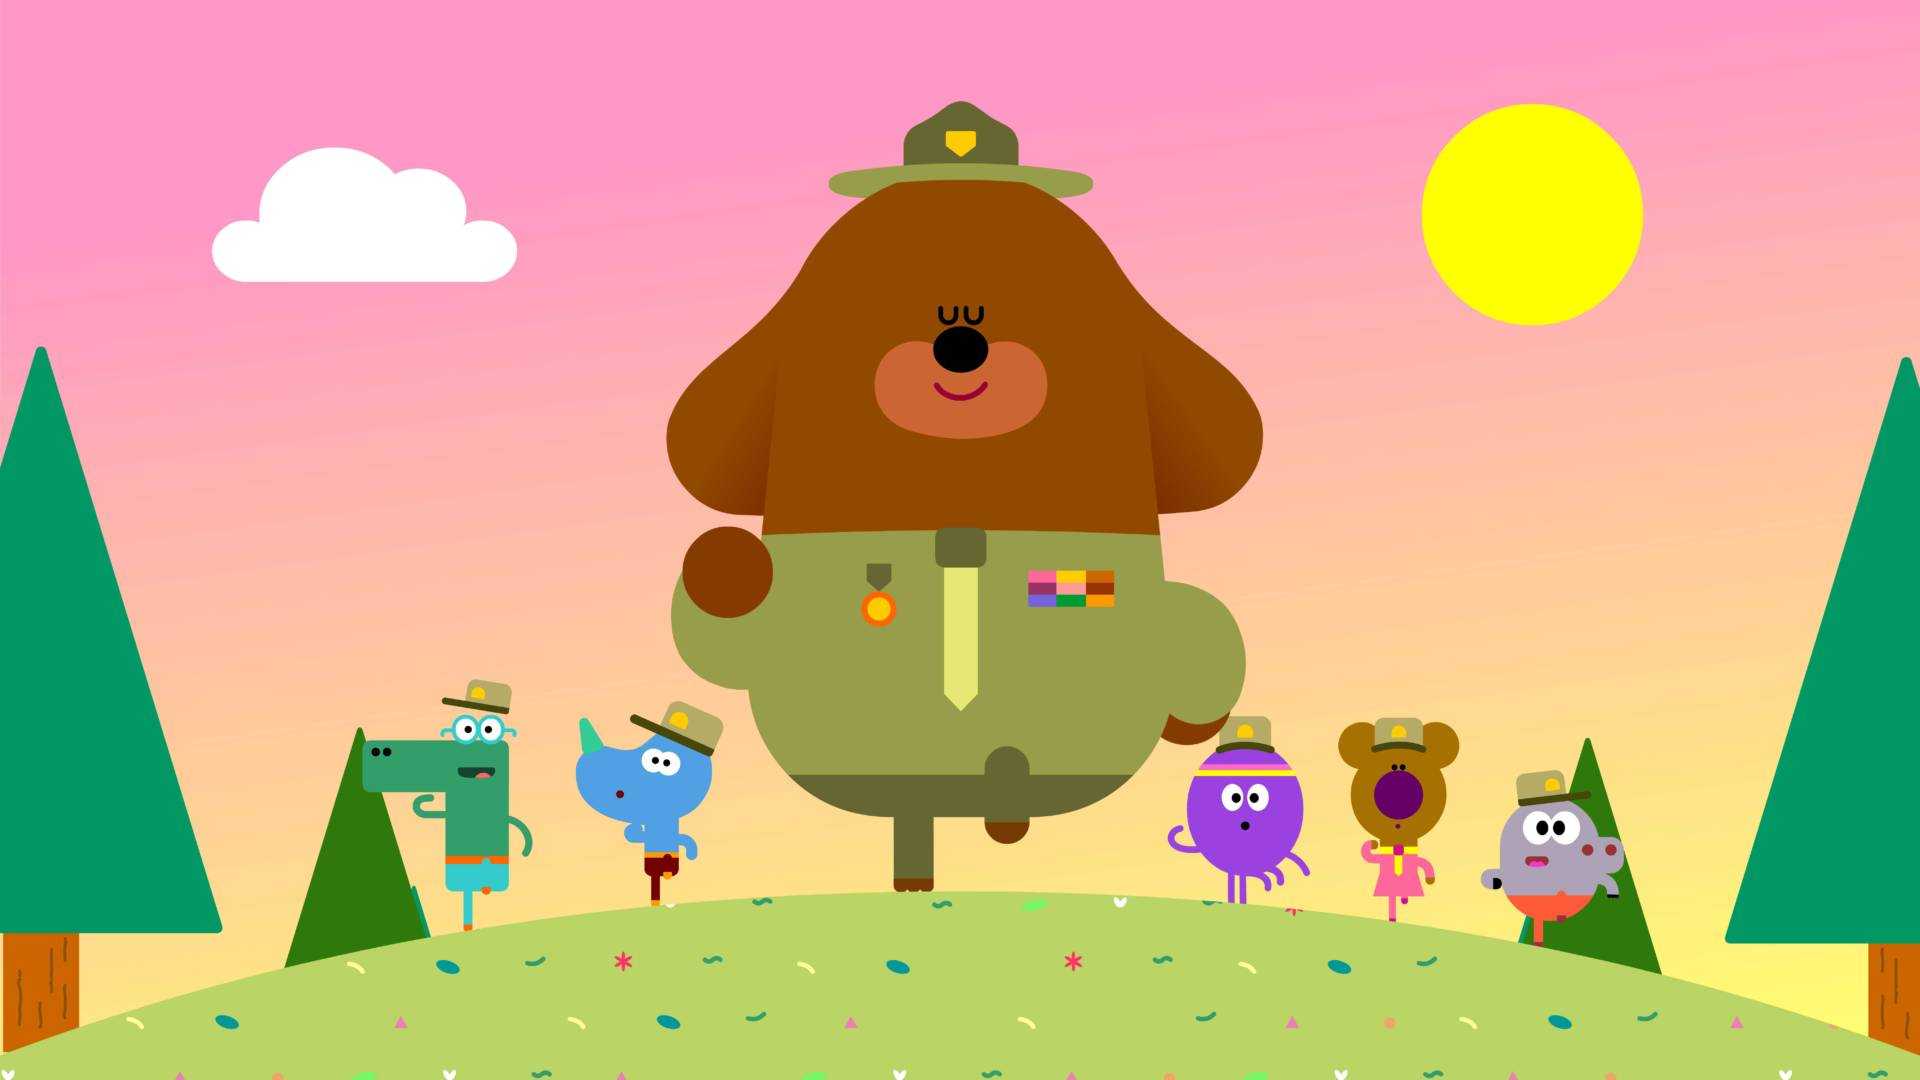 Duggee and the Squirrels march together in unison